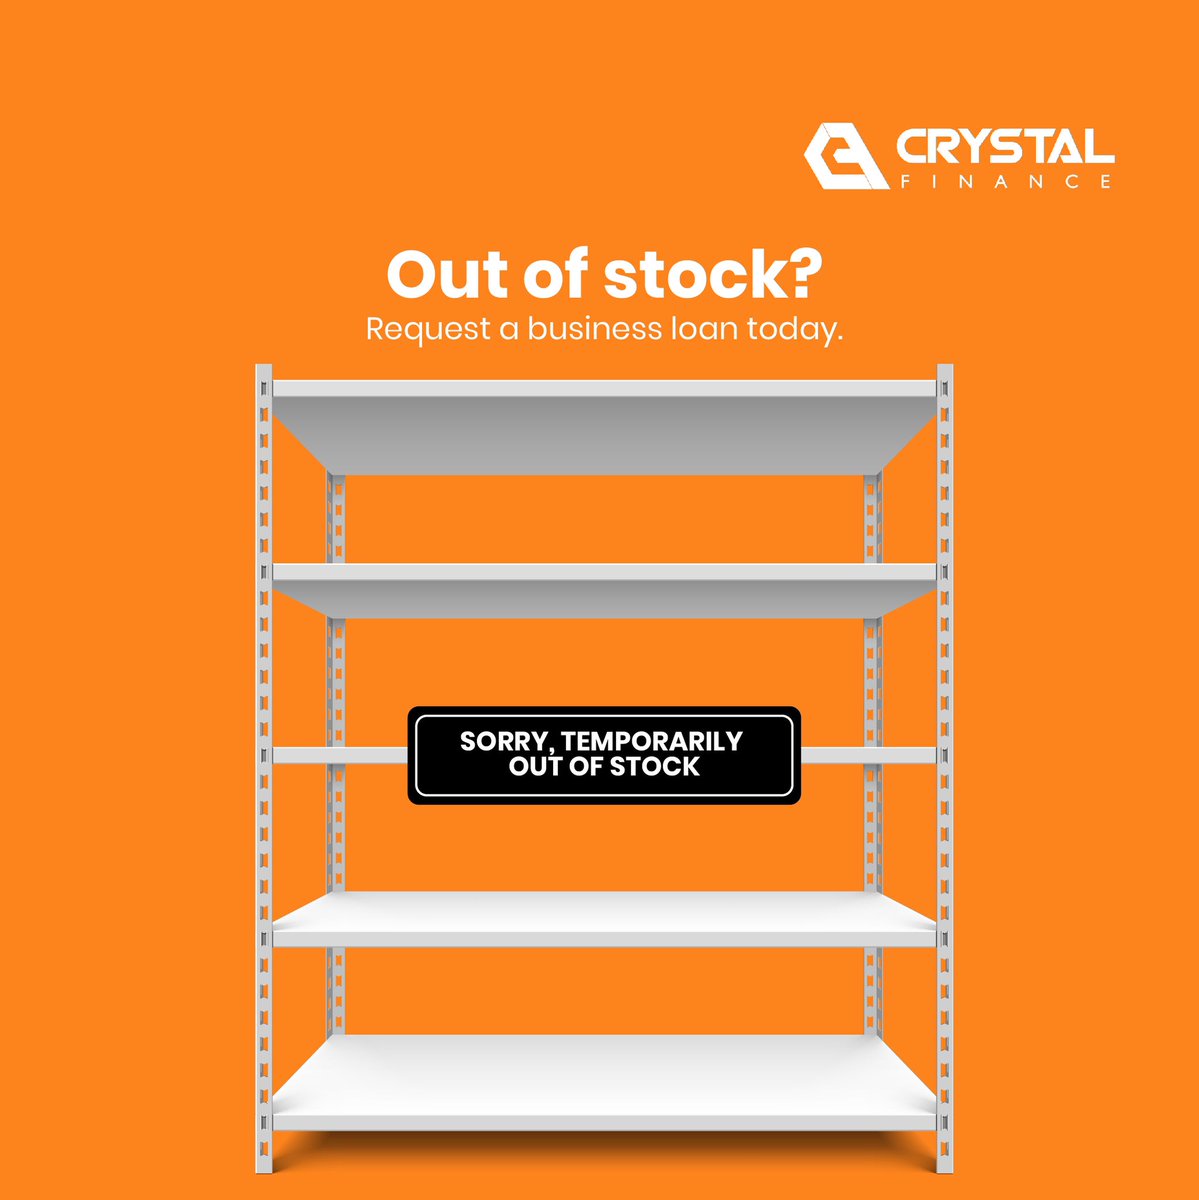 Having to tell your customers the sad 'out of stock' story? We can help fix that!

Call or chat with us on Whatsapp: 07010733772 for more information.

#SMEloans
#CrystalFinance